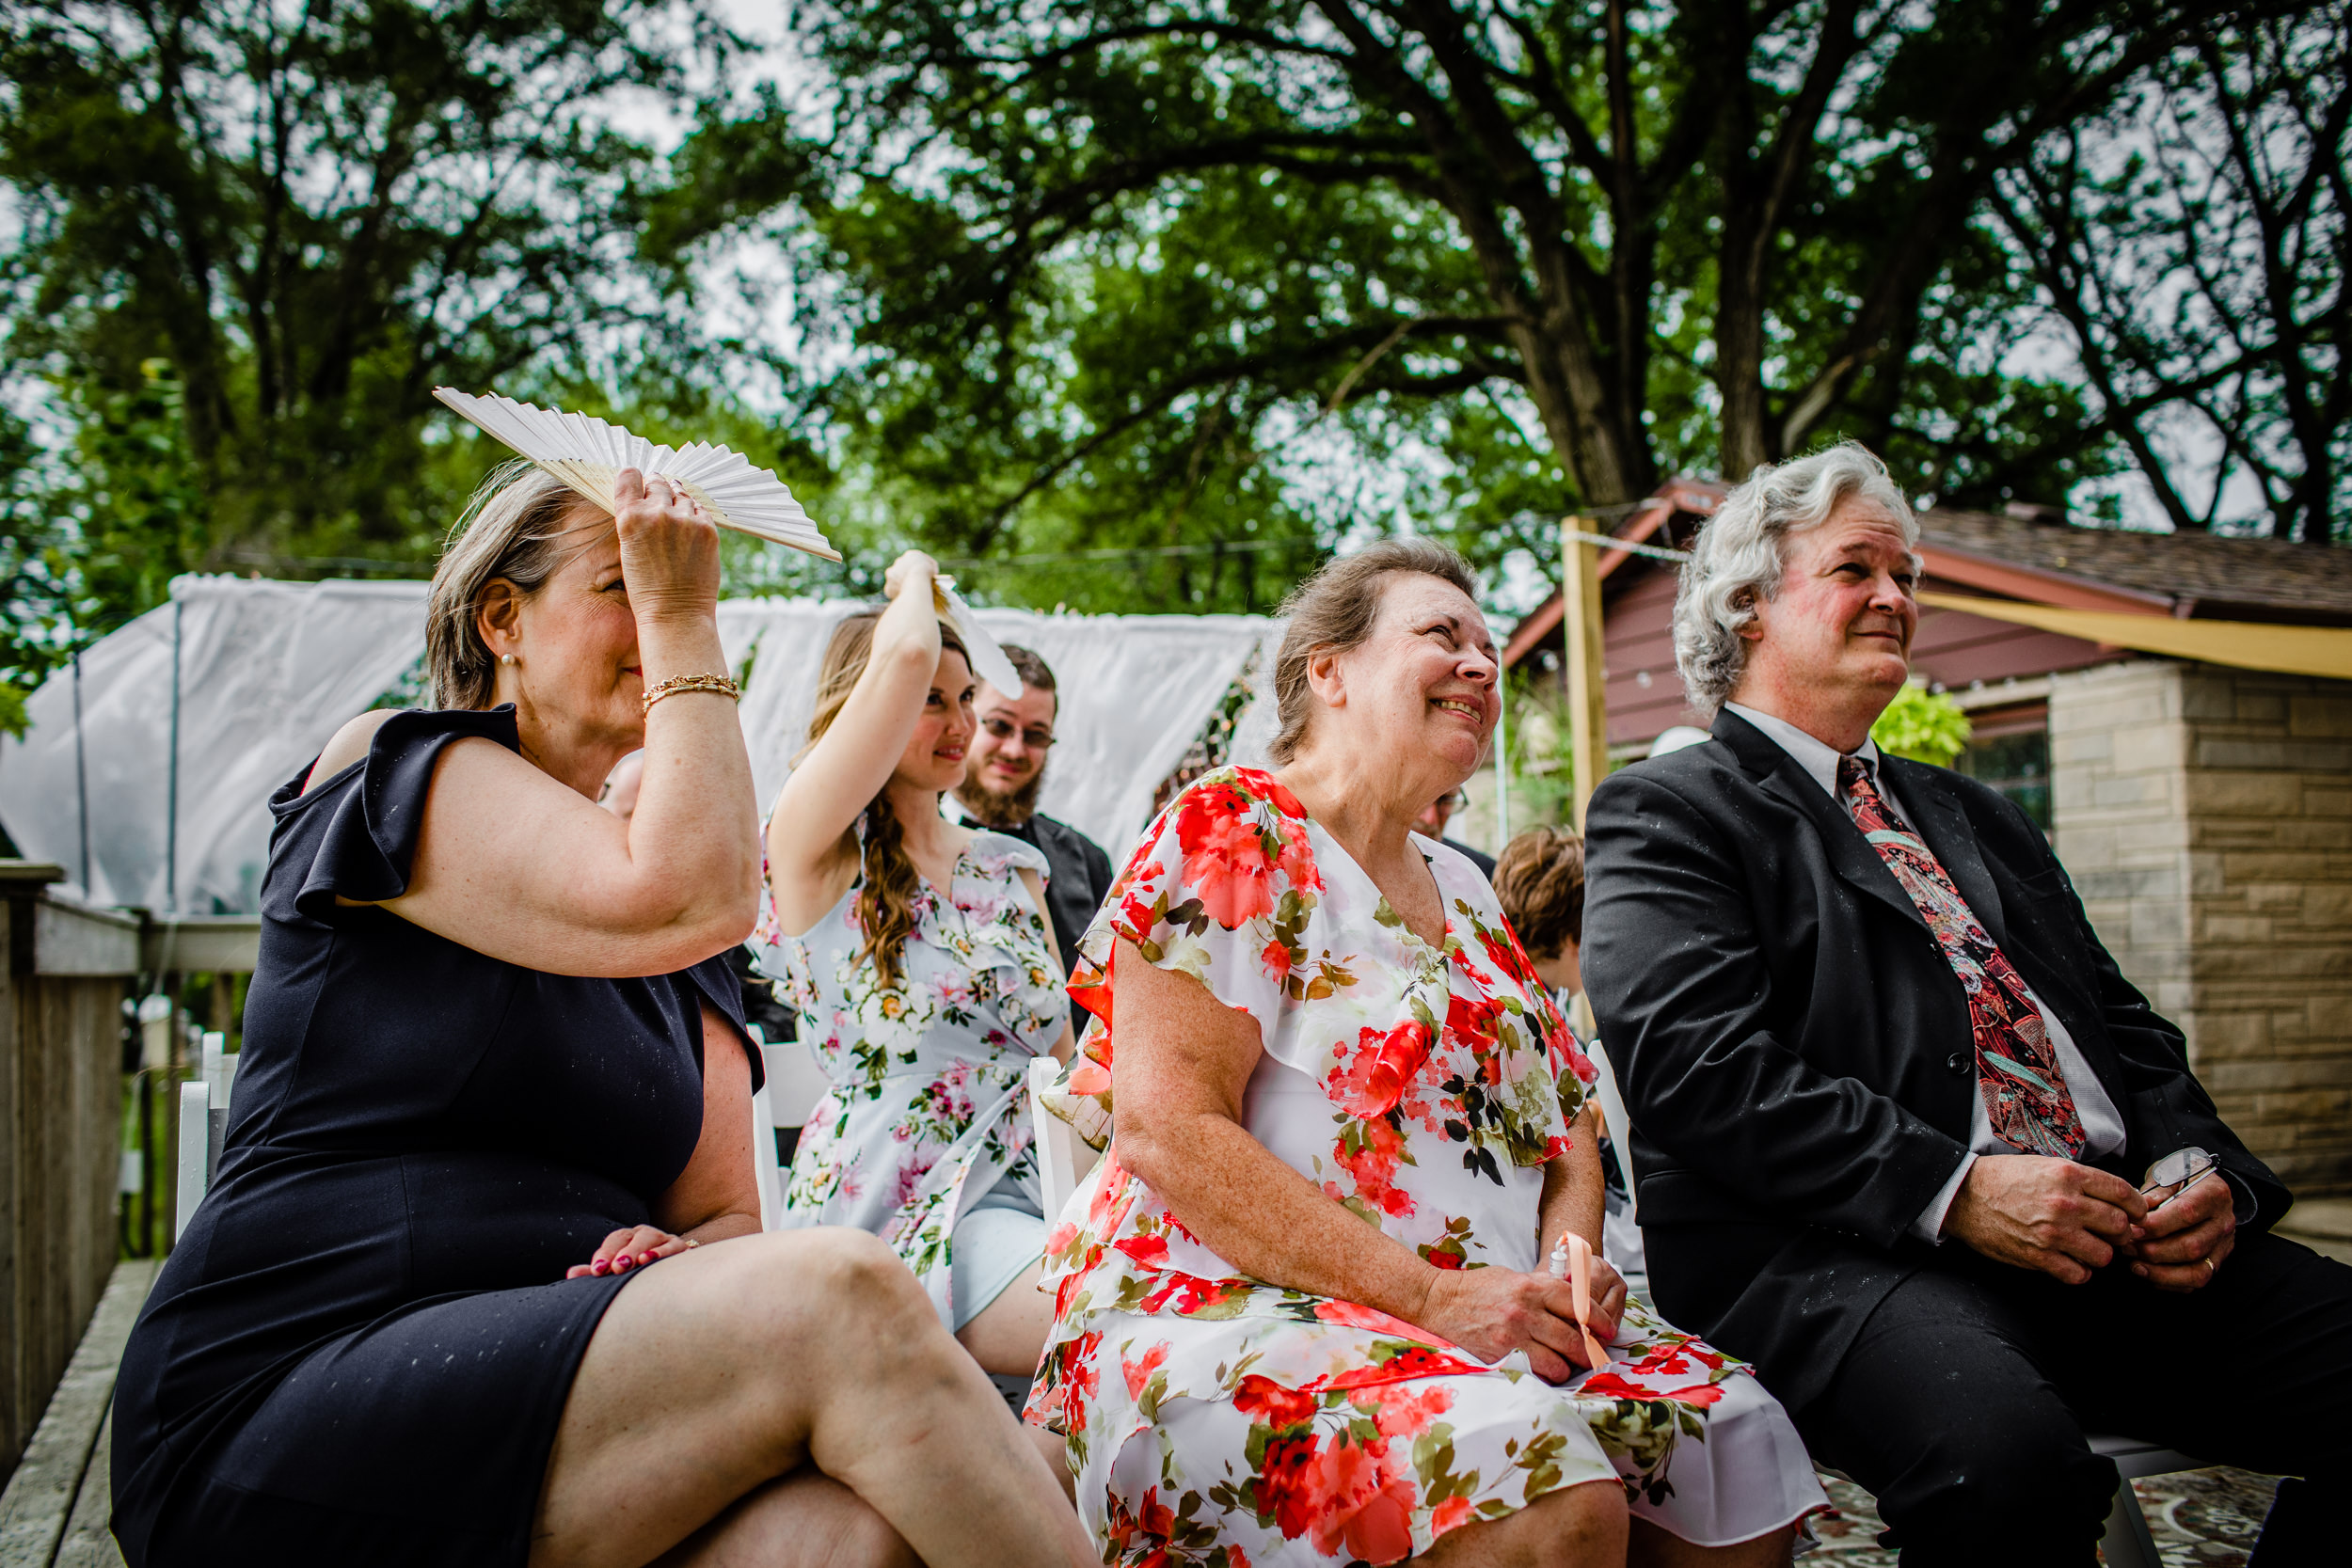 Guests listen to a couple share their vows in the rain during a New Lenox backyard wedding.